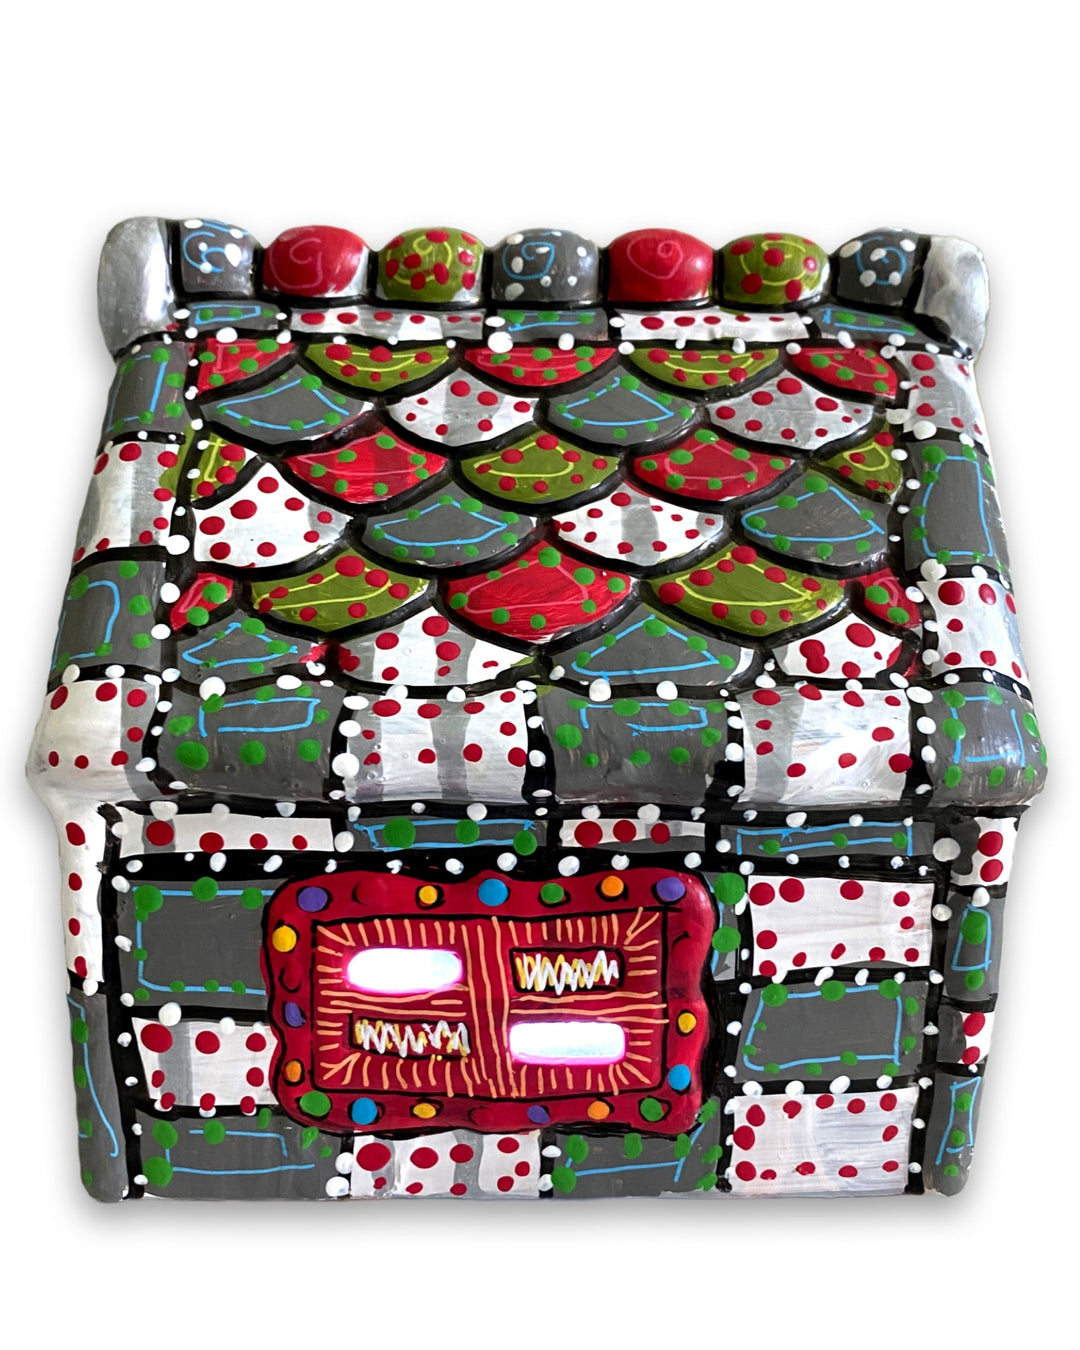 The Gingerbread House Grey & White Hand Painted Ceramic LED Christmas Village House - Heather Freitas 